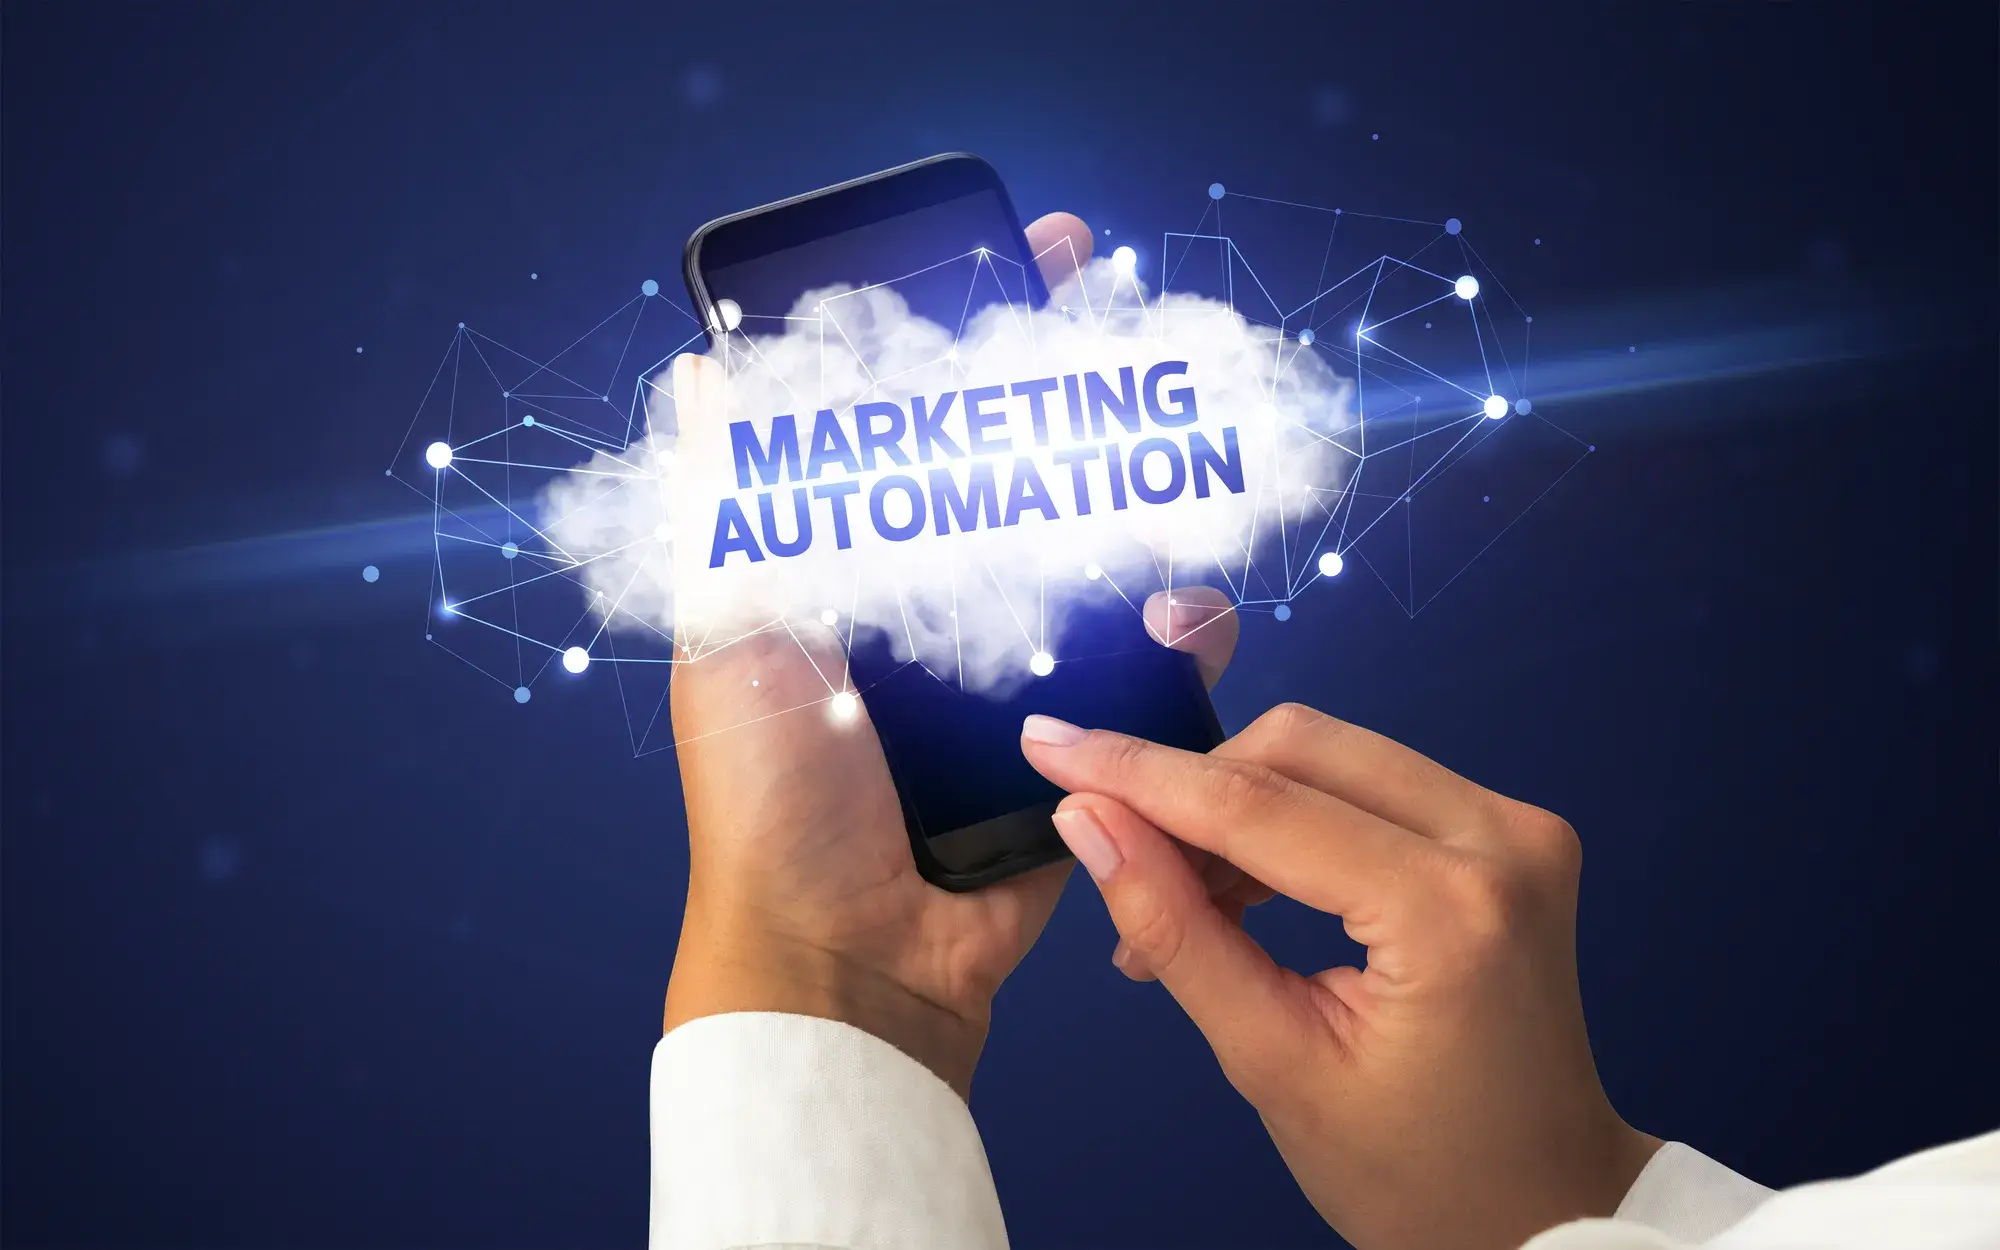 A person holding a mobile phone with a hologram displaying the words "Marketing Automation" and its benefits: efficiency, personalized communication, data insights, and lead nurturing.